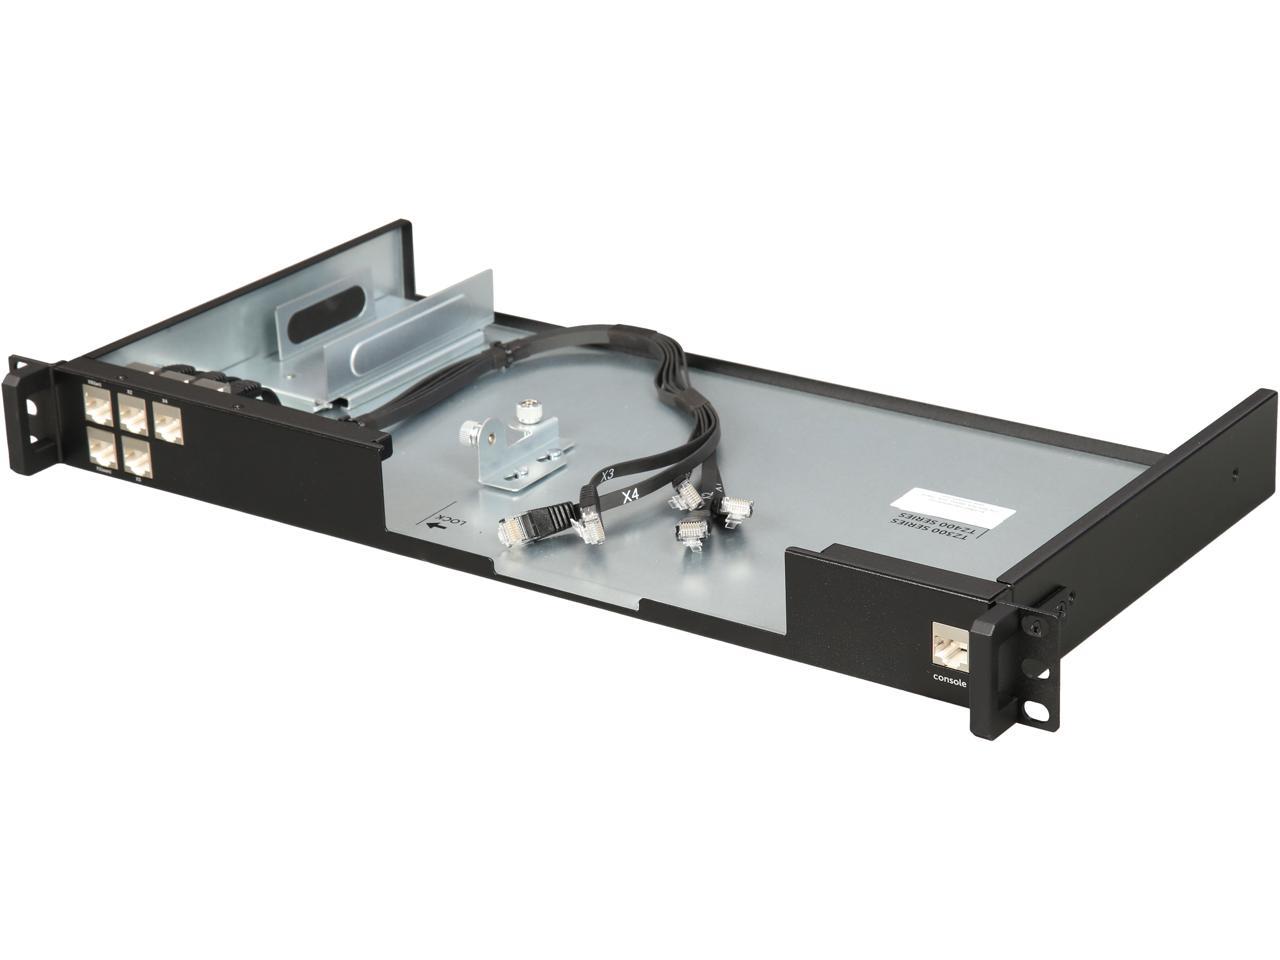 SonicWall 01-SSC-0742 TZ 300 Series Rack Mount Kit - image 1 of 5